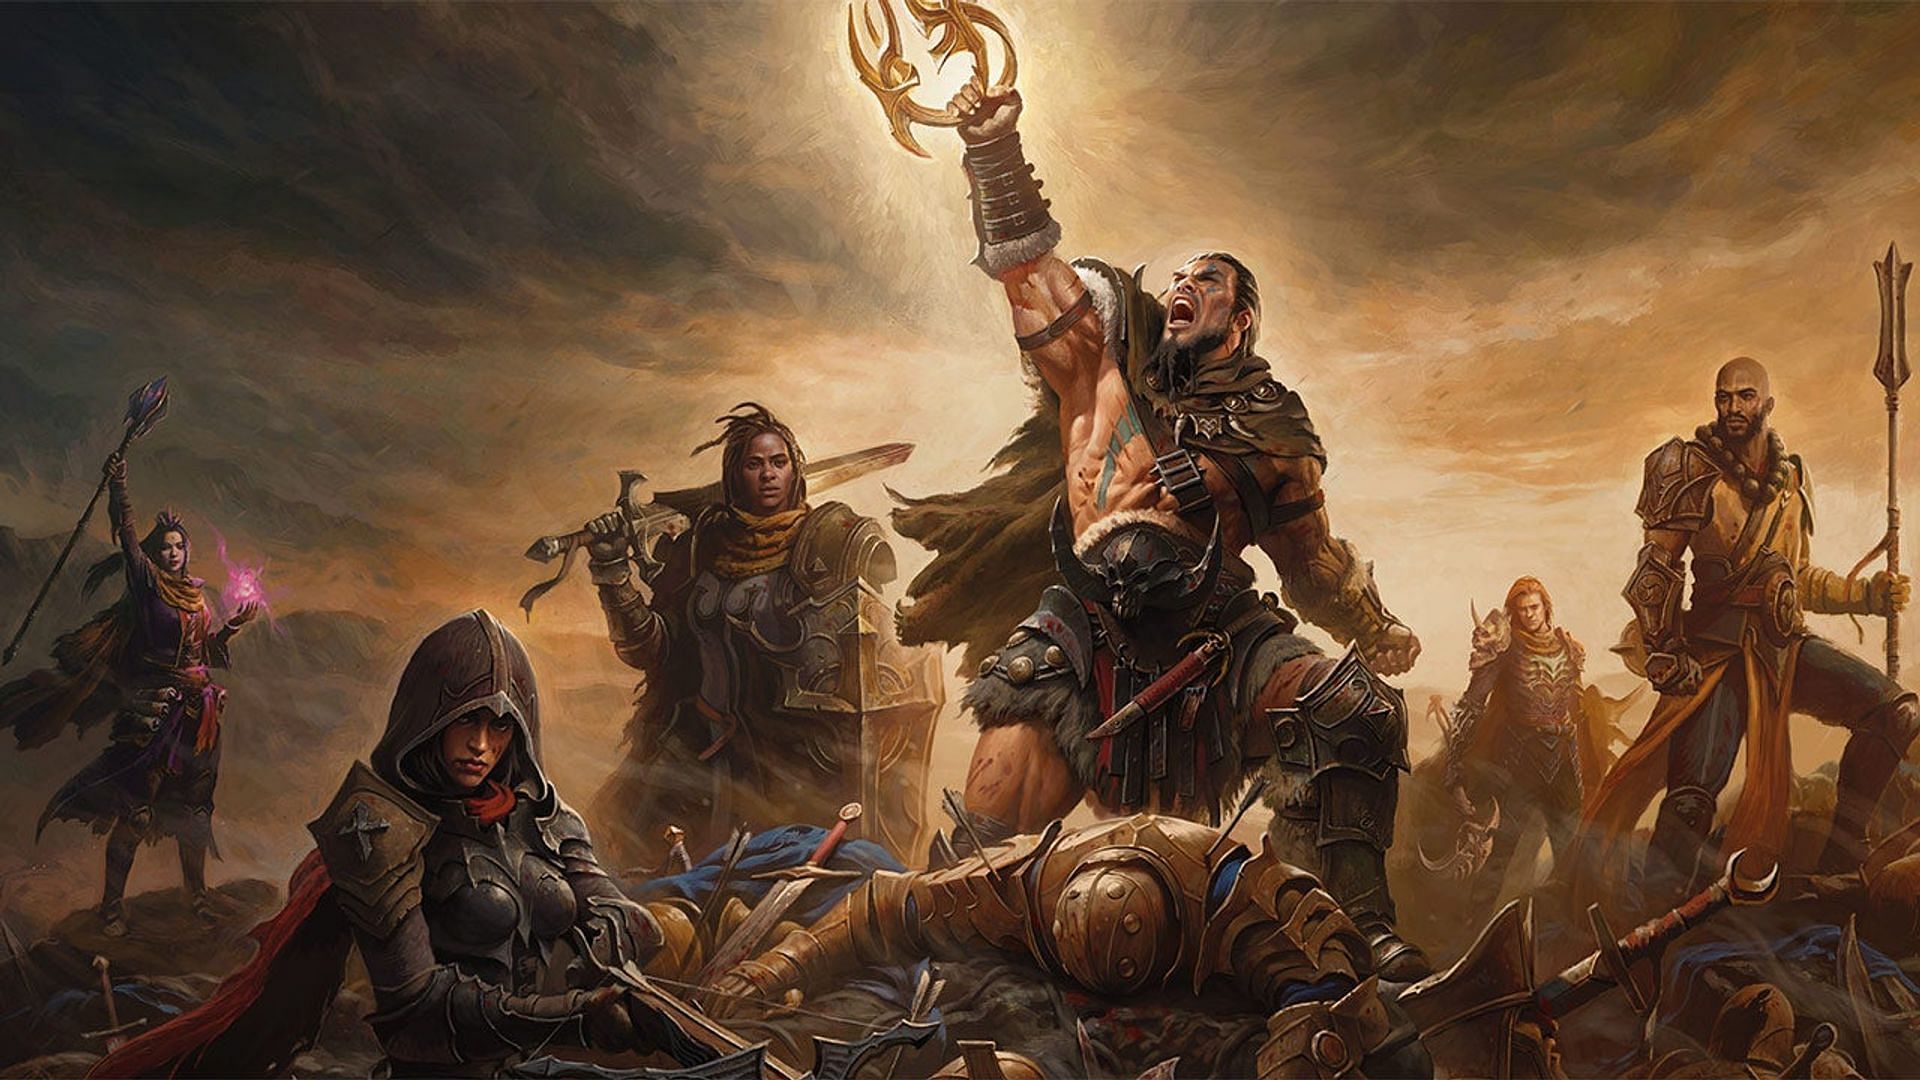 Diablo Immortal is out on mobiles and PC in beta (Image via Blizzard Entertainment)